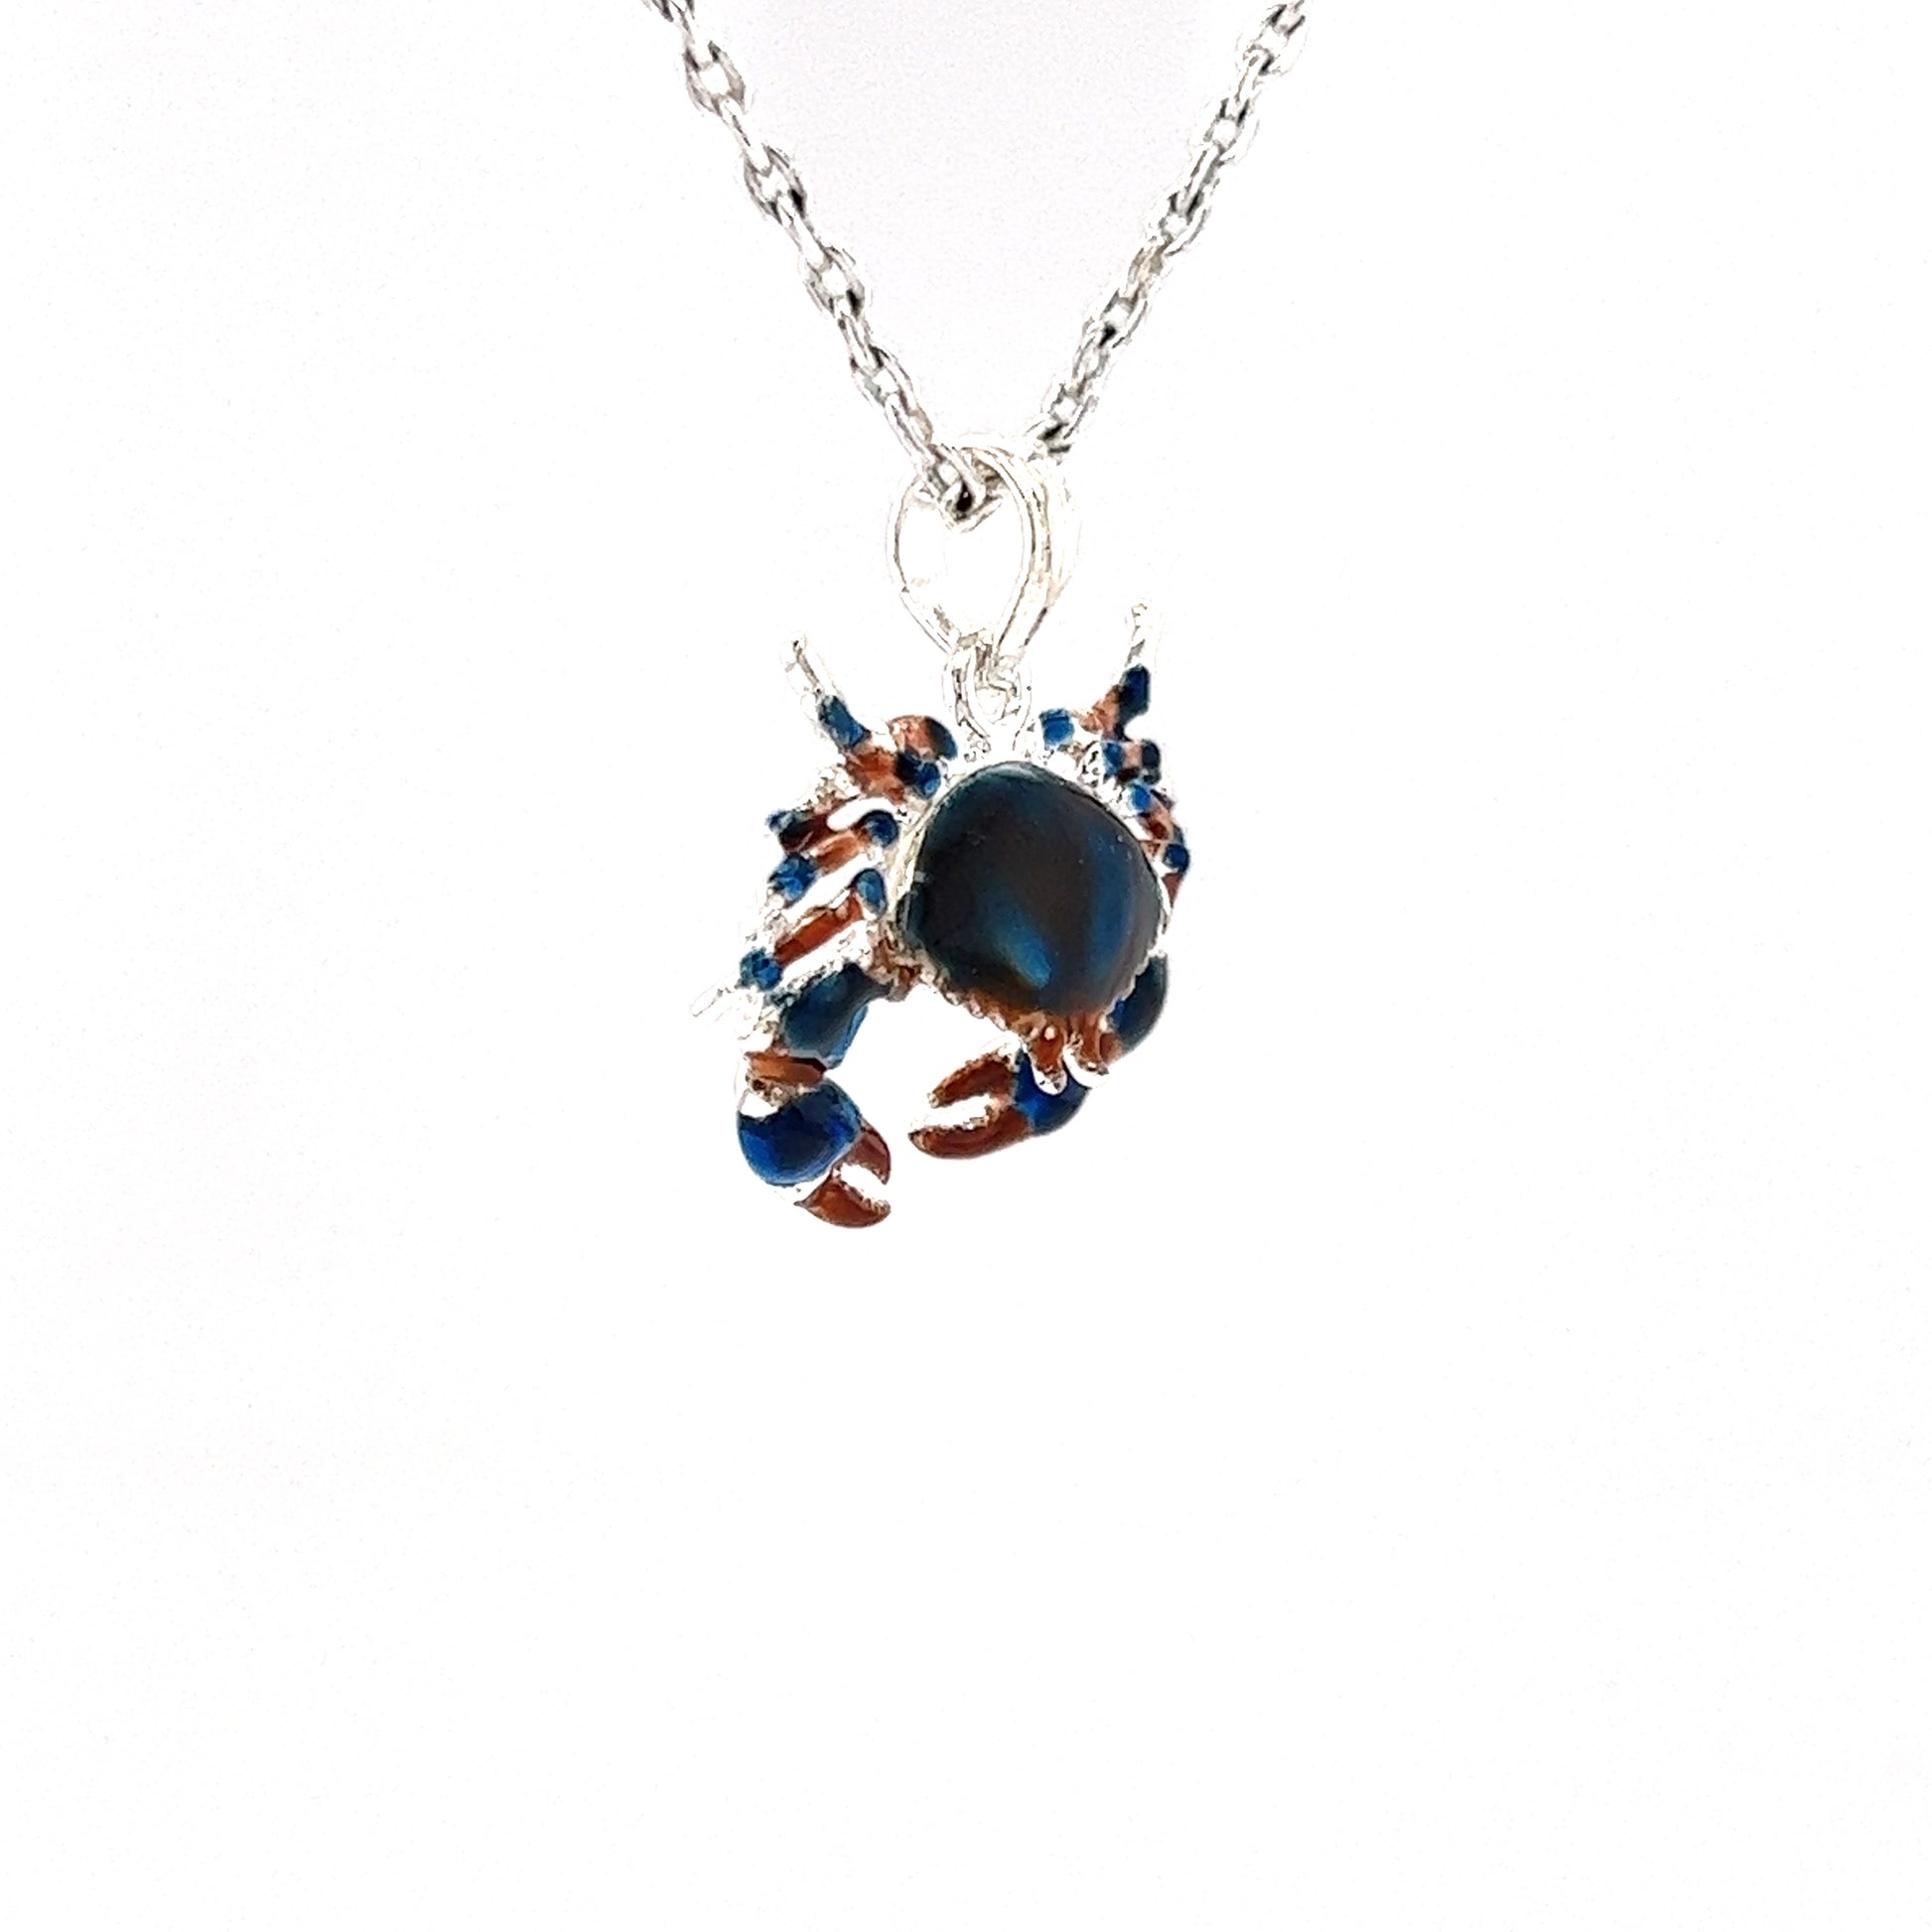 Blue Stone Crab Small Pendant with Enameling in Sterling Silver Left Side View with Chain